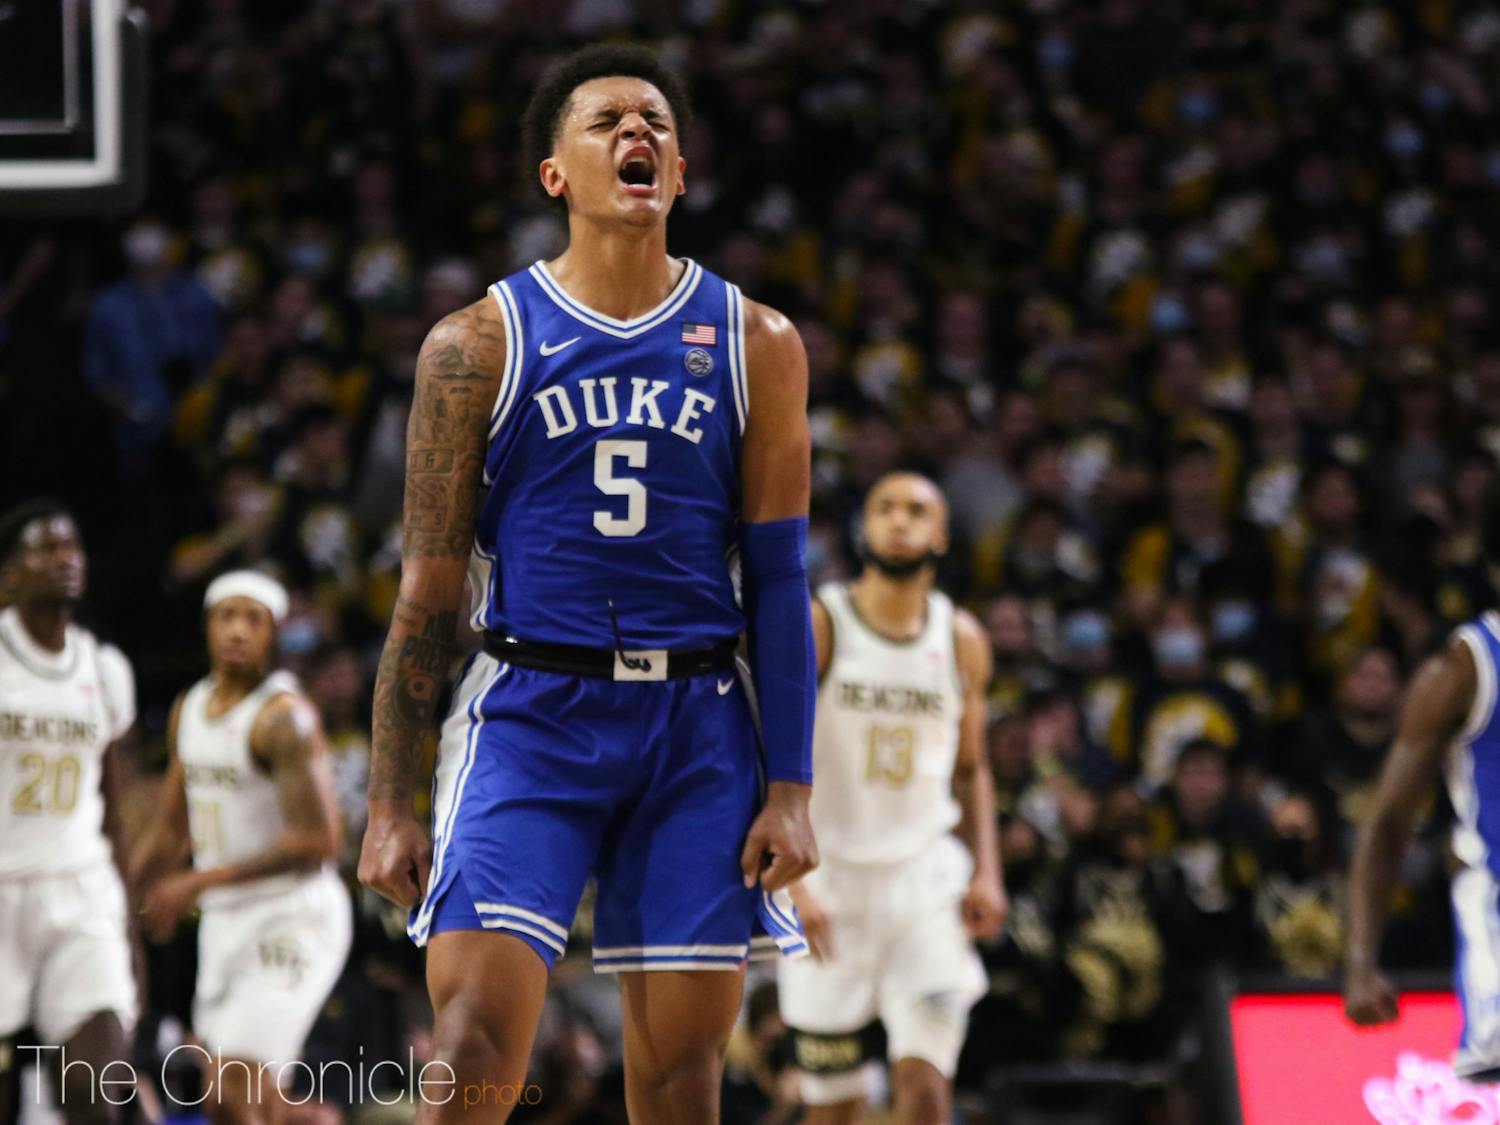 Paolo Banchero scored a team-high 24 points Wednesday in Duke's win at Wake Forest.